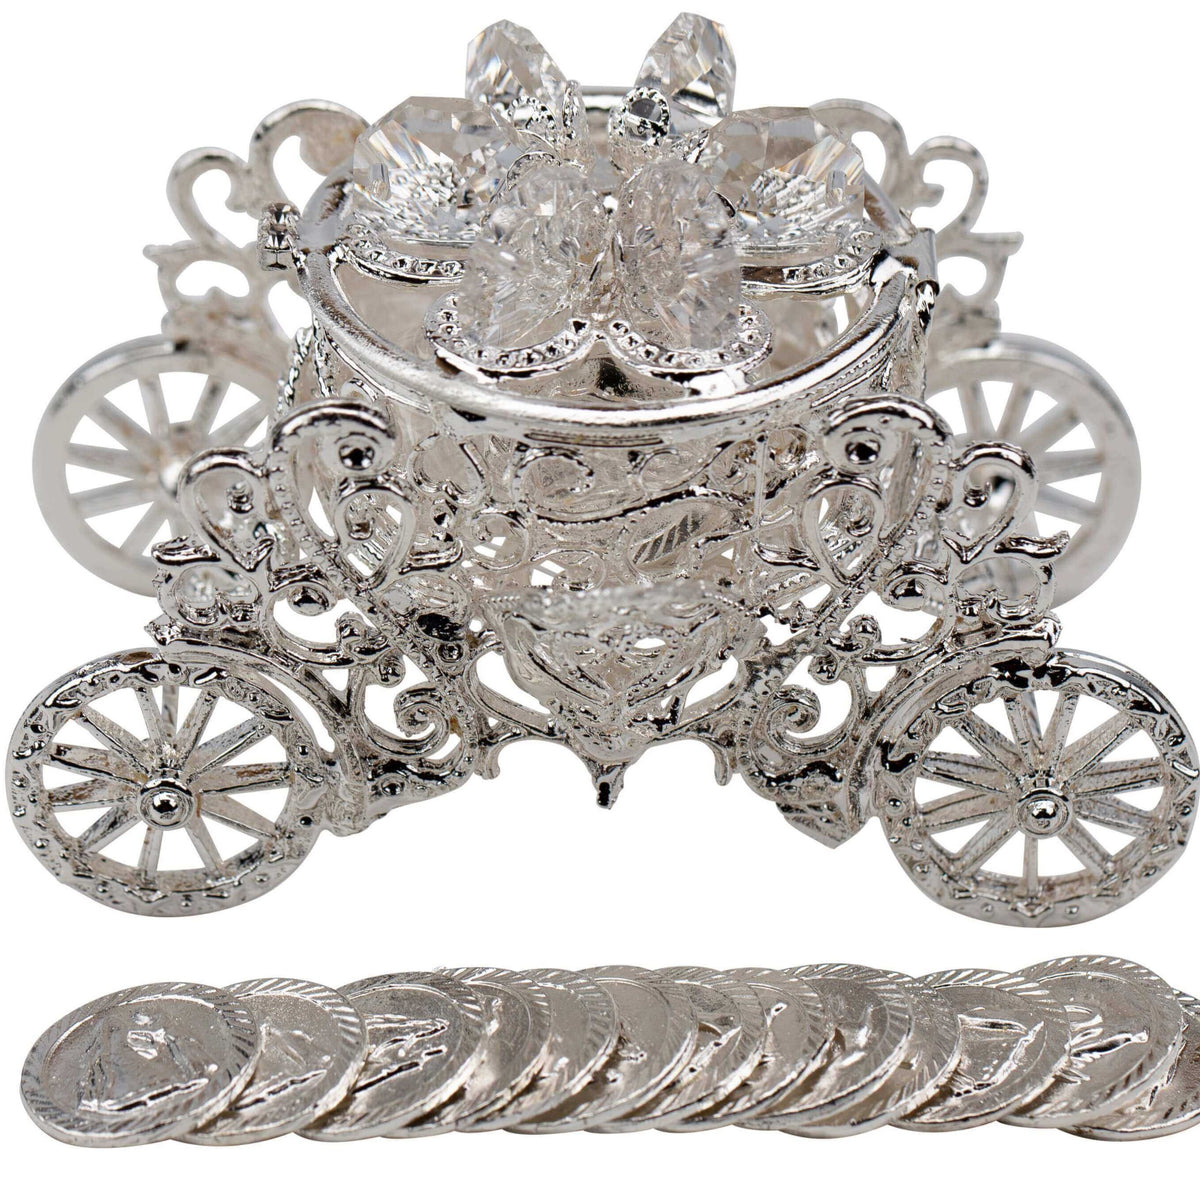 Carriage Chest With Crystal Beading. This beautiful accessory is available is silver or gold. This set includes the traditional 13 coins used in a wedding ceremony.